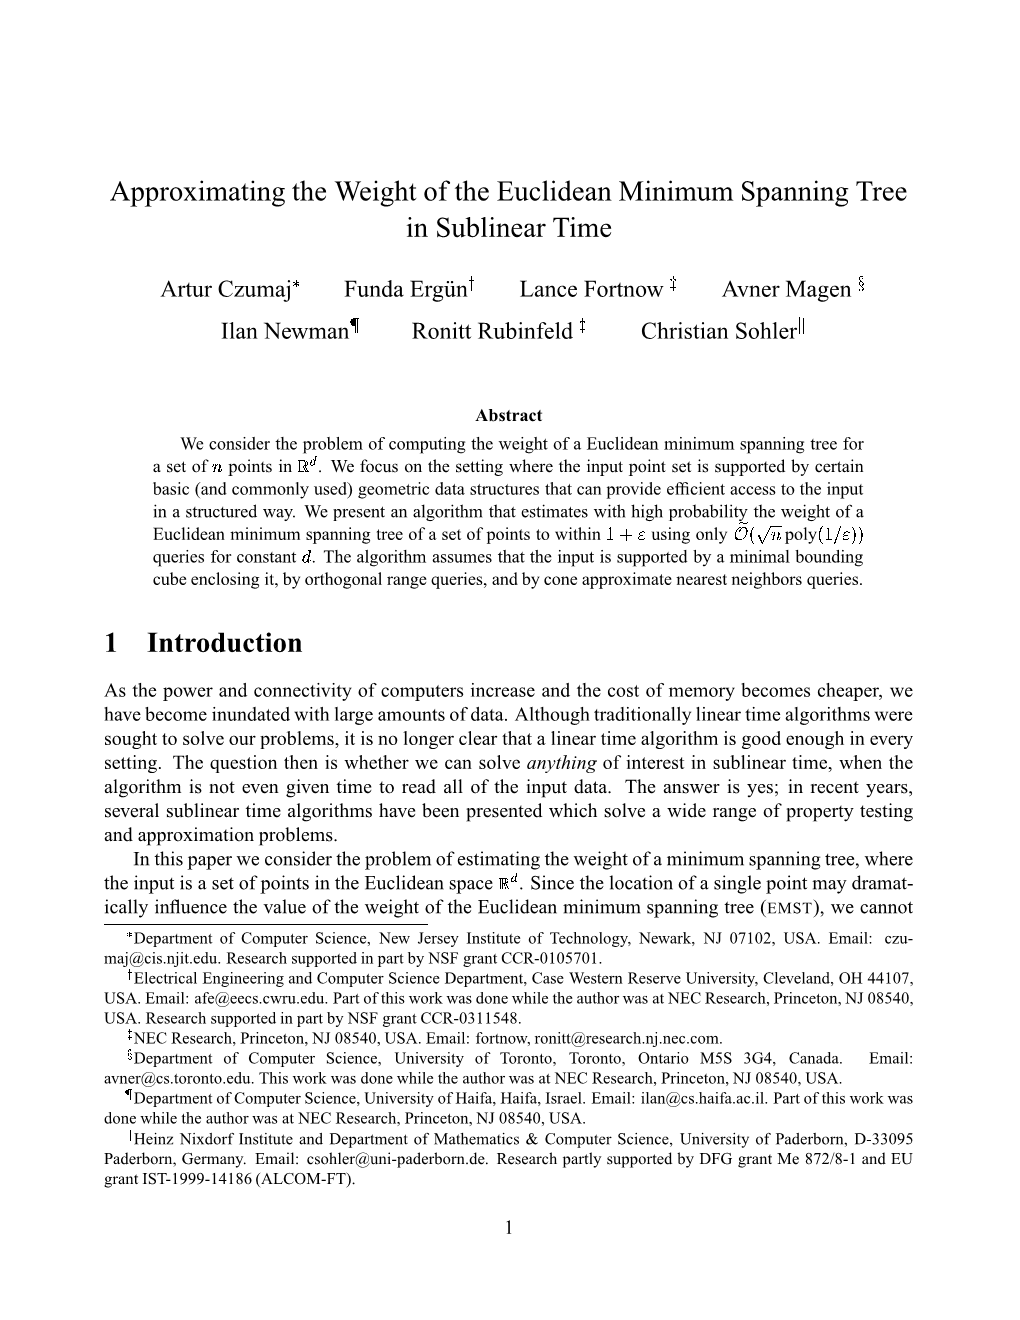 Approximating the Weight of the Euclidean Minimum Spanning Tree in Sublinear Time 1 Introduction